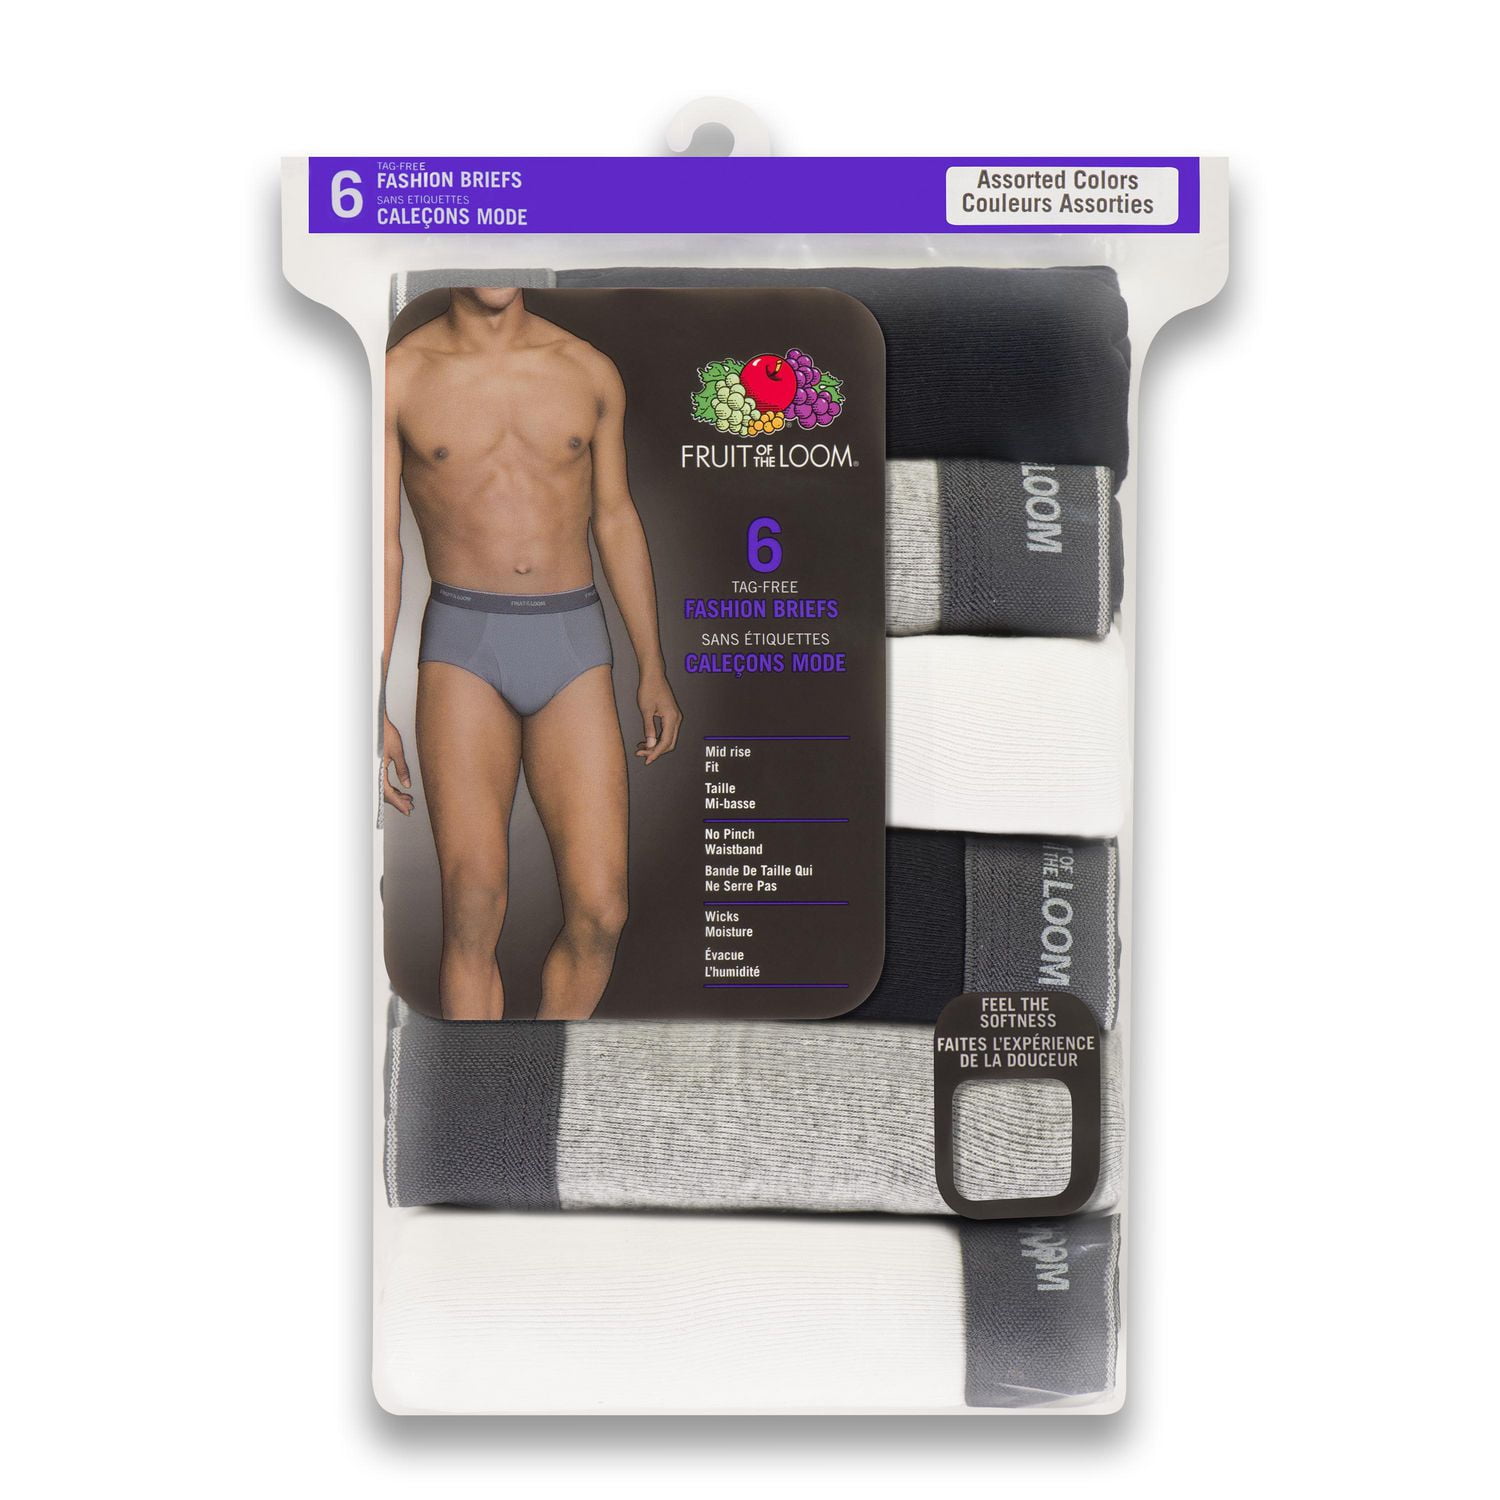 Fruit of the Loom Men's Briefs Mid-Rise Underwear 12-Pack Colors